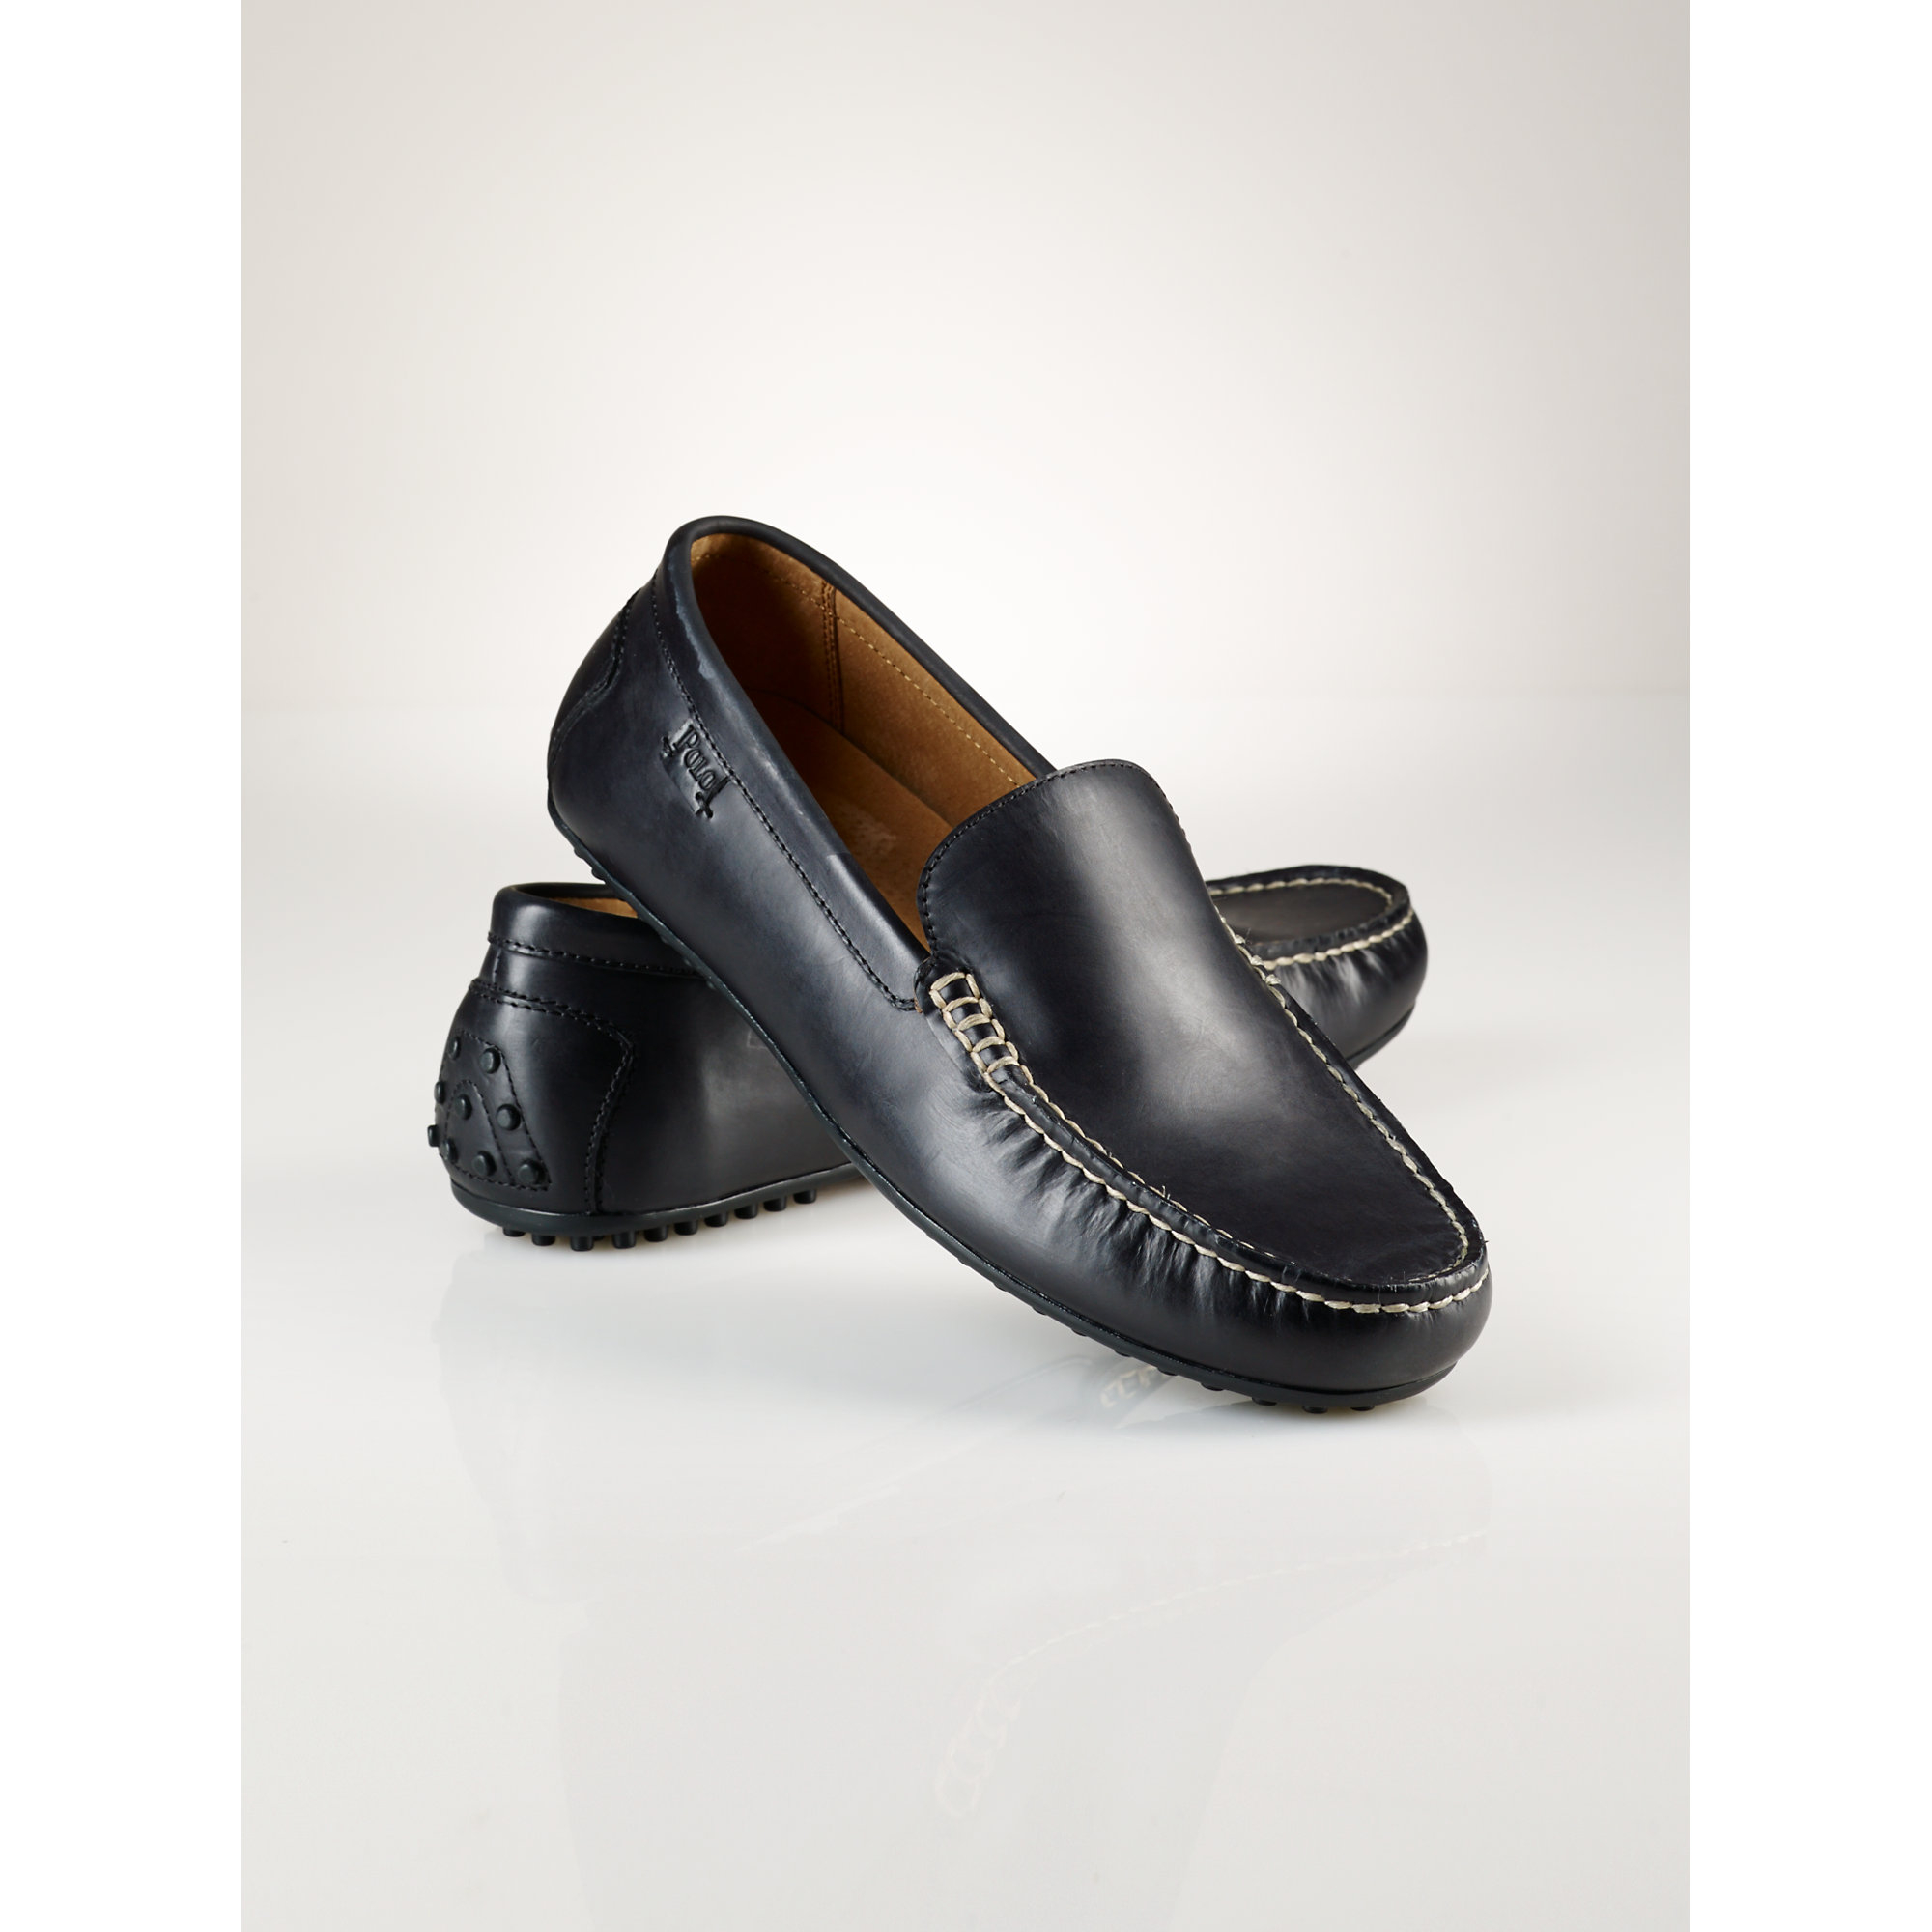 polo woodley loafer